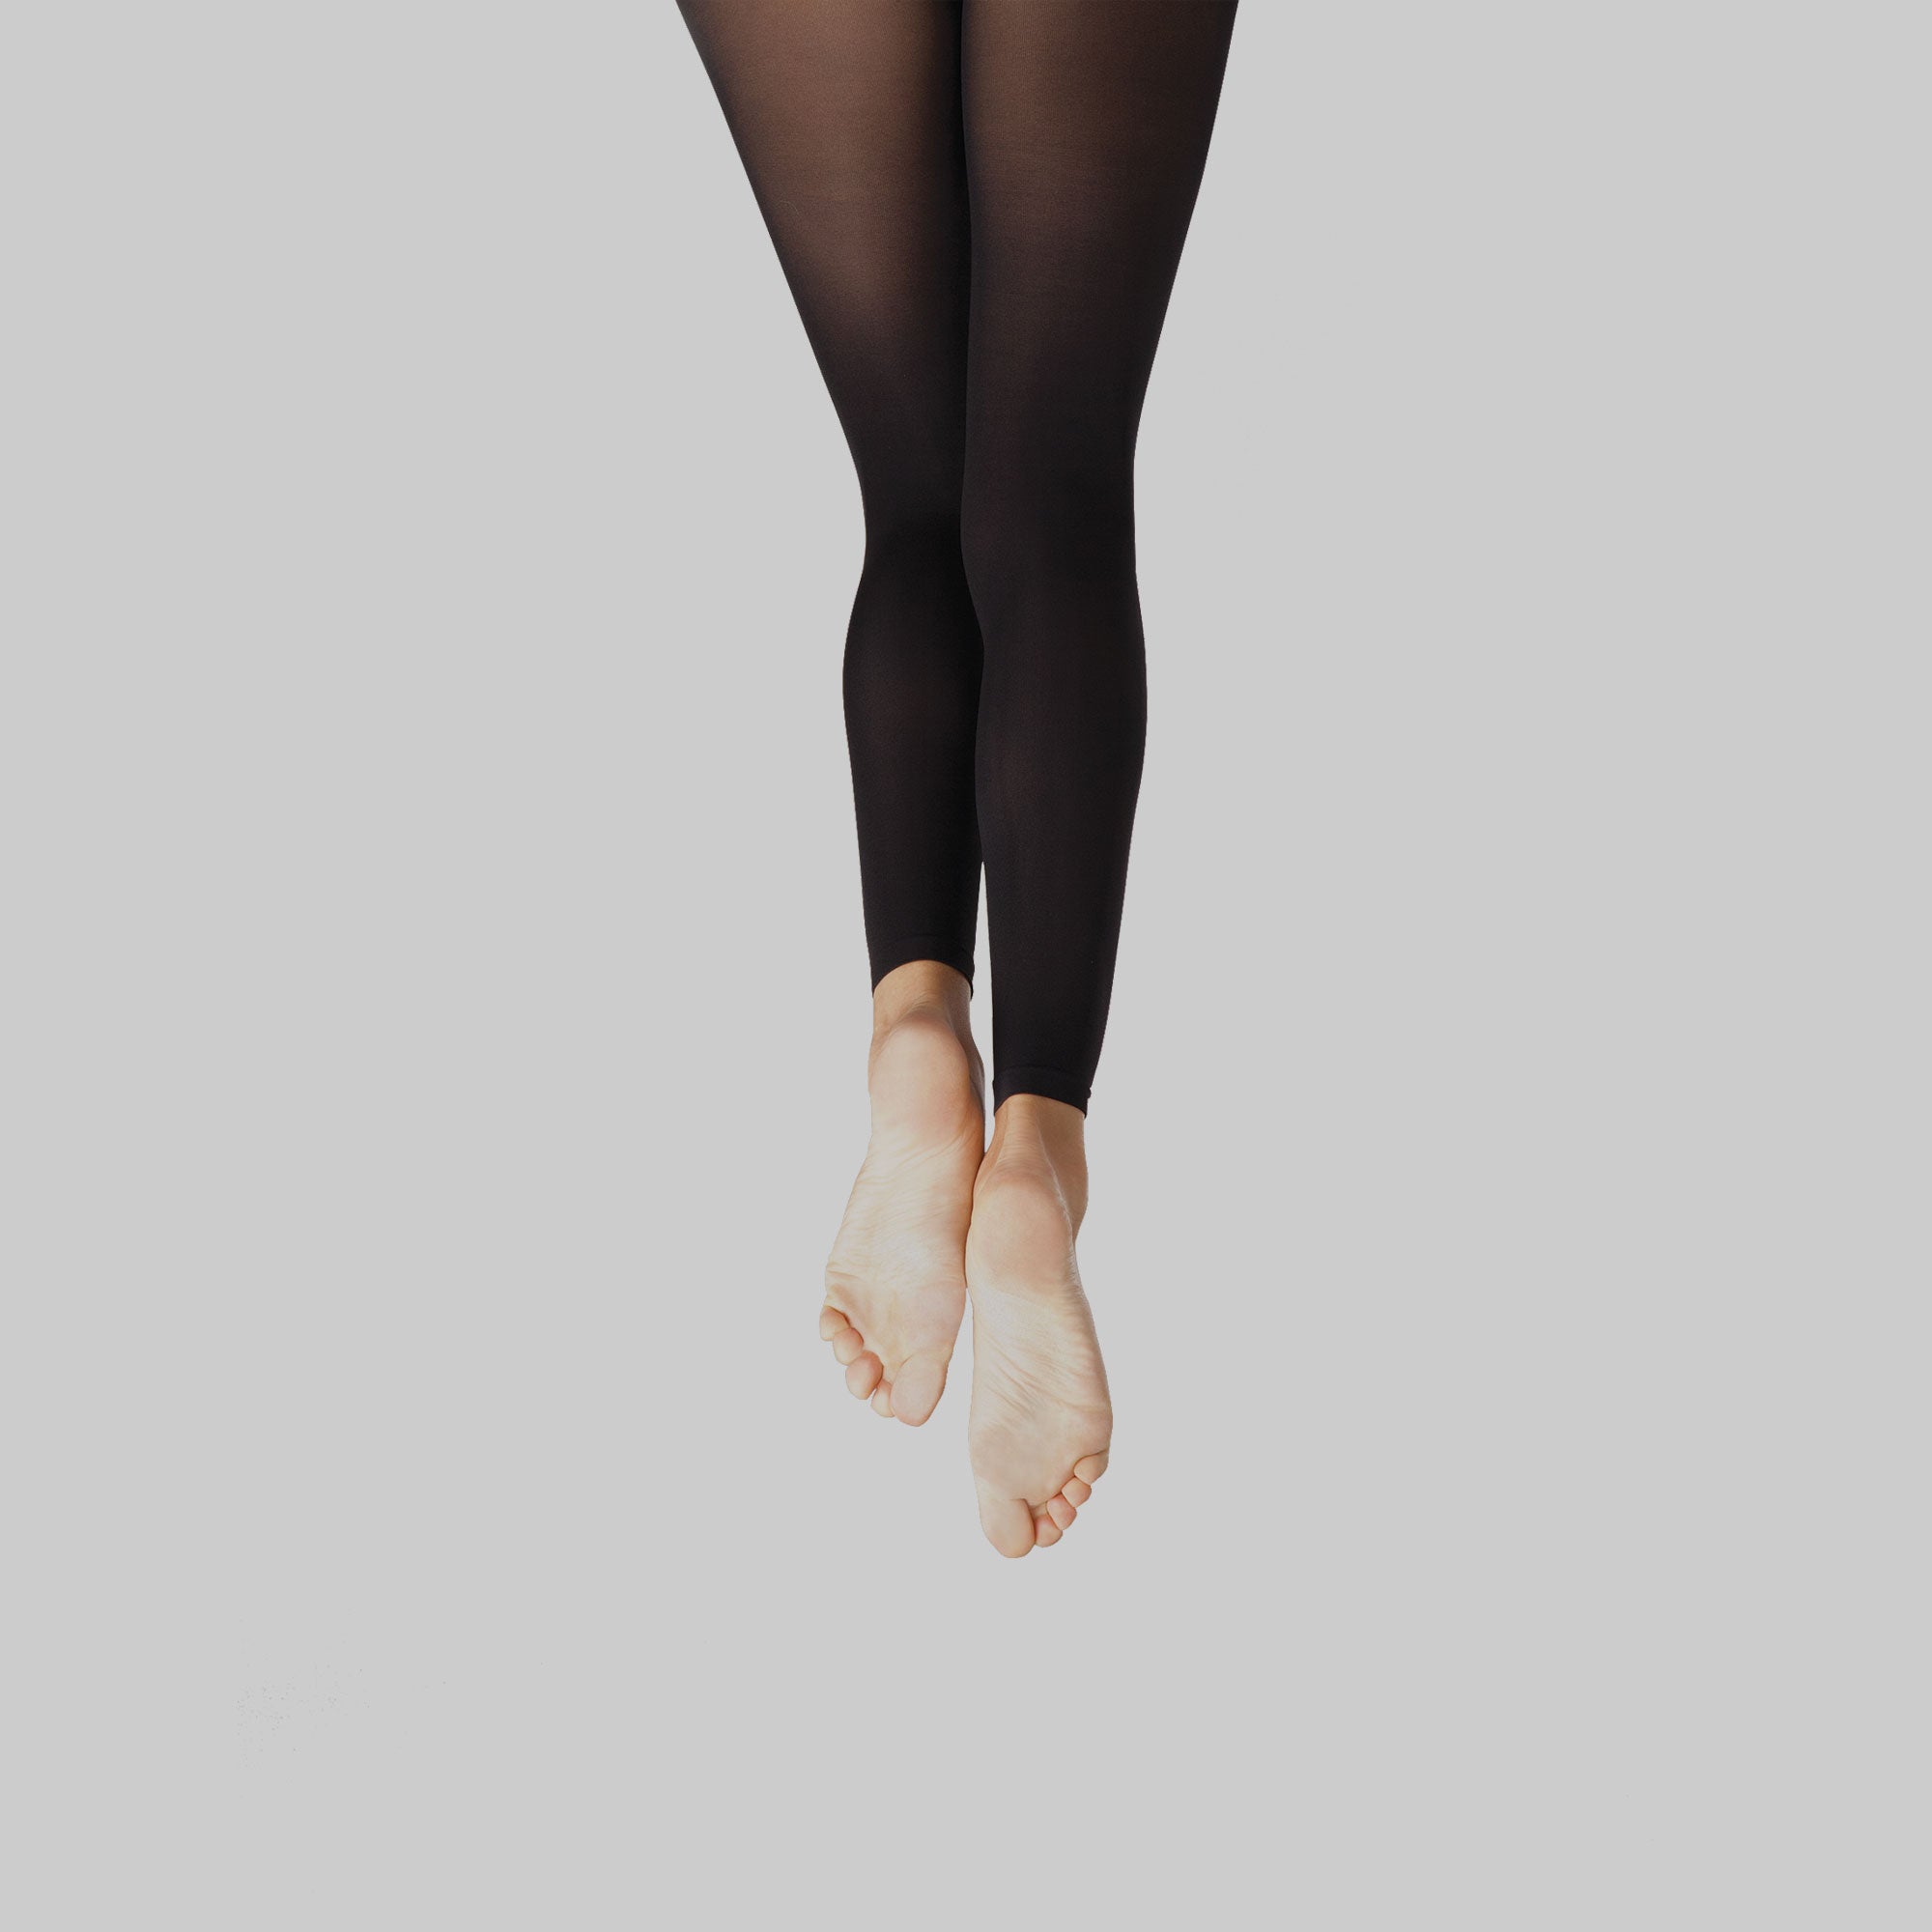 2 Pc Ladies White Black Winter Tights Stockings Footed Dance